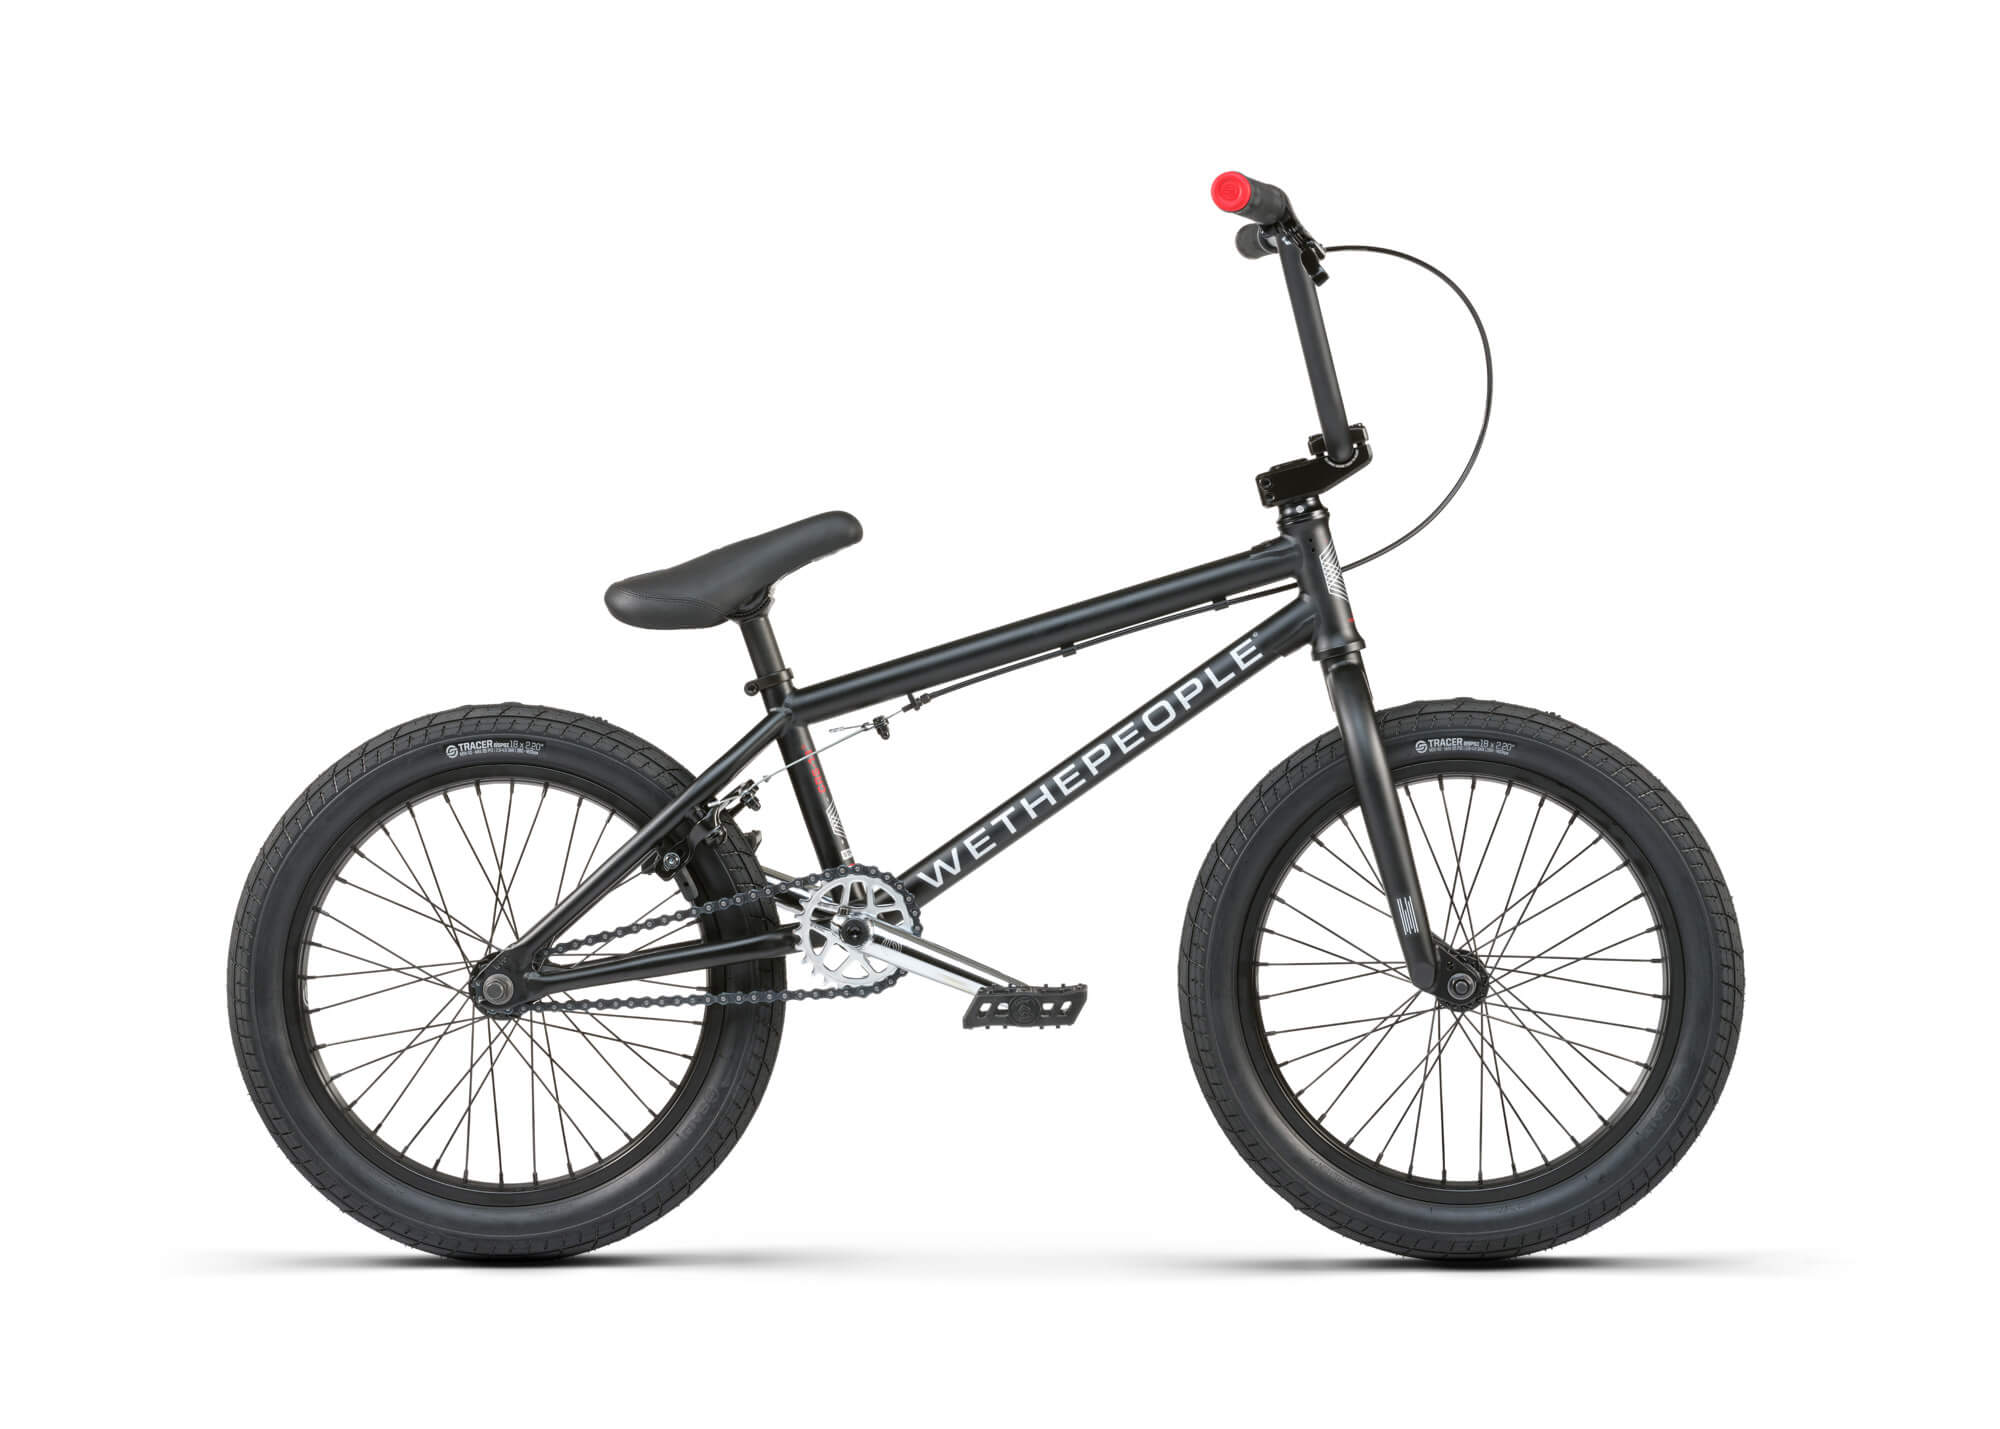 WeThePeople 18" CRS BMX Bike Side Right Side View